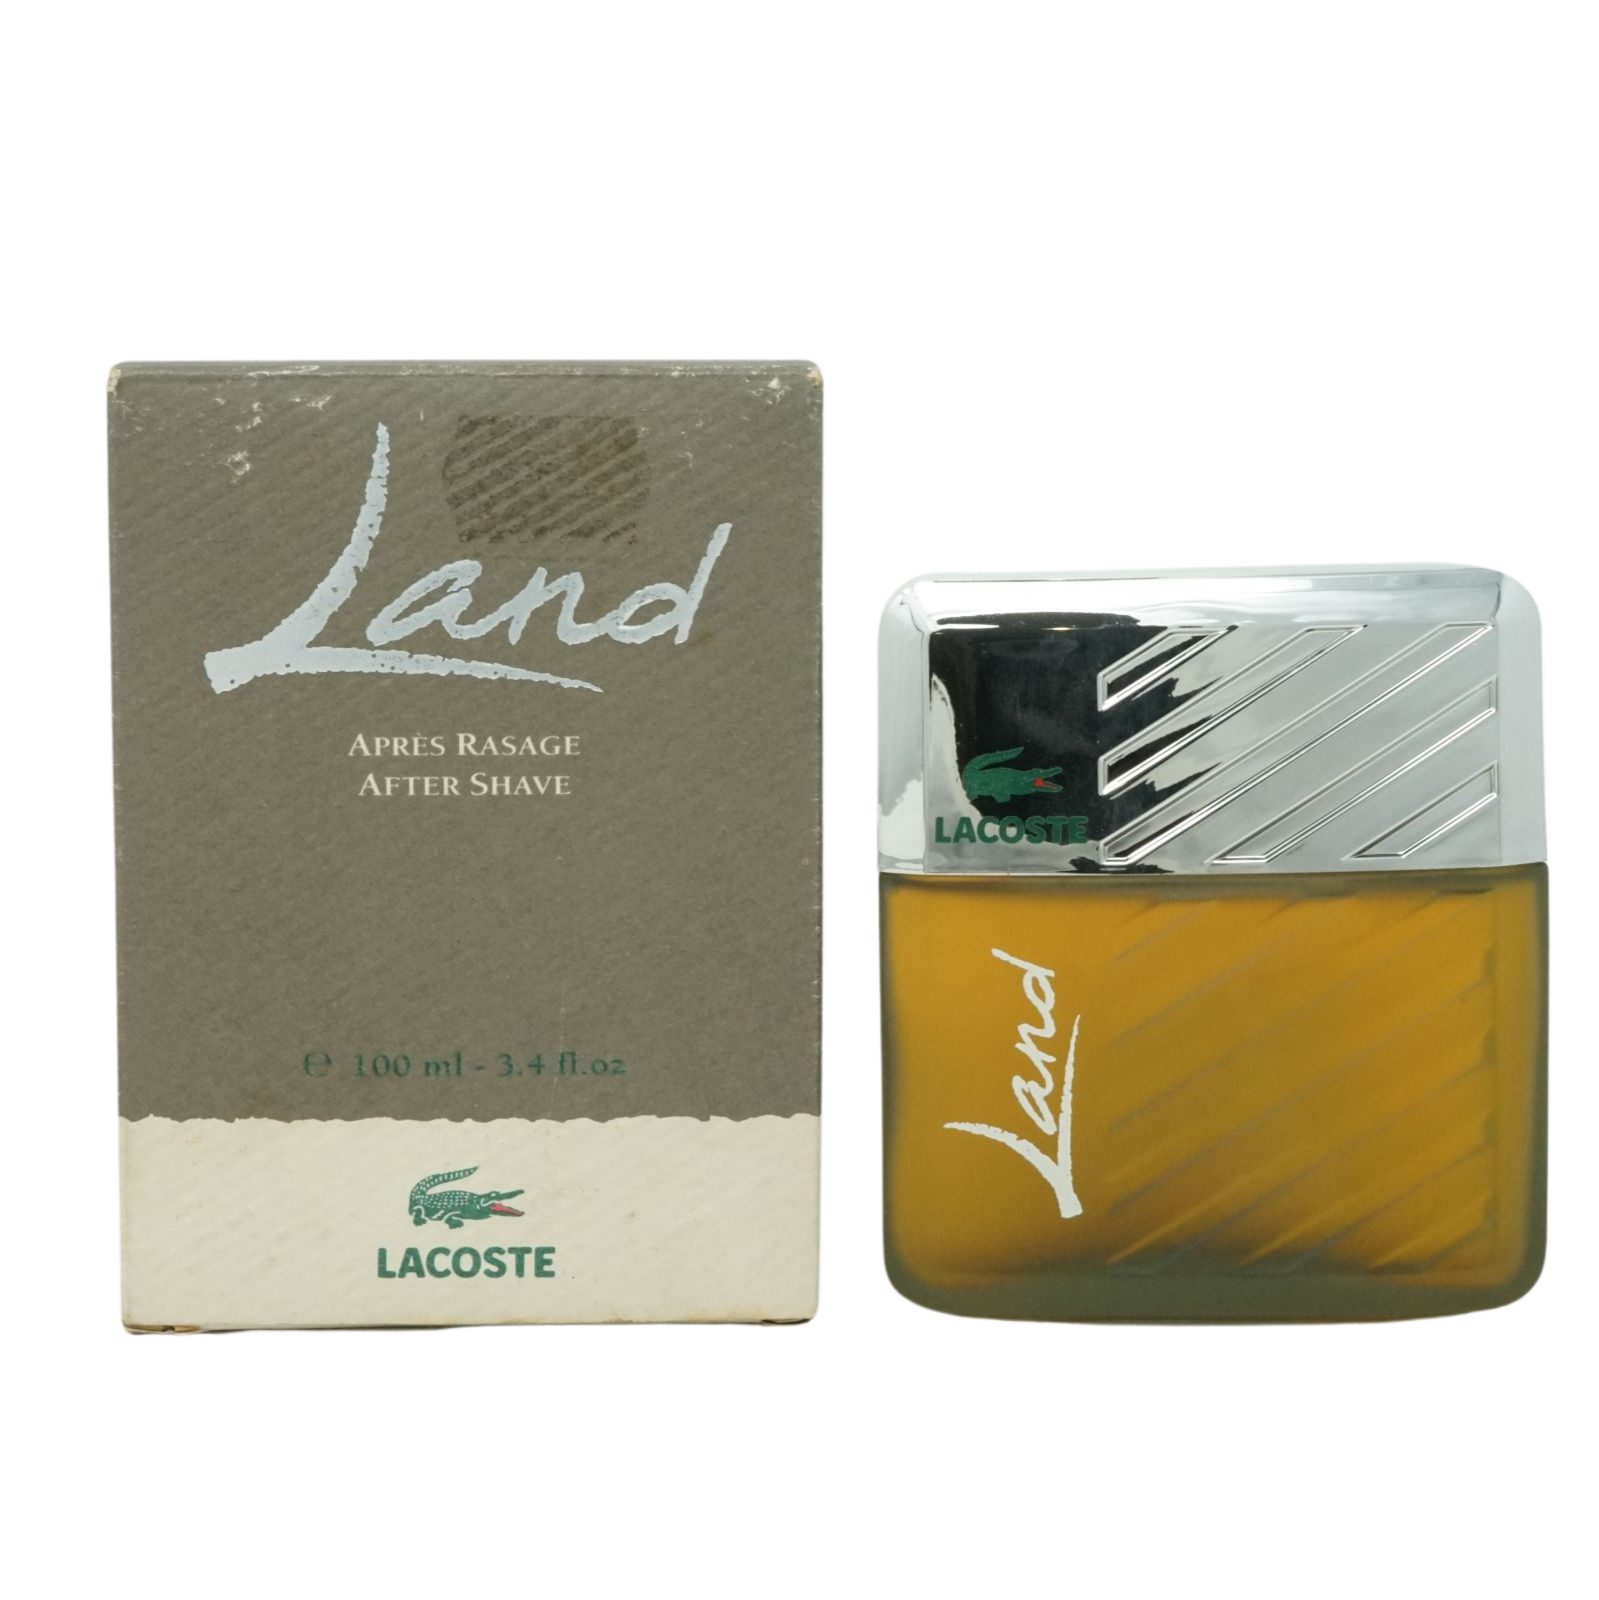 After After-Shave Shave Lacoste Lacoste Land 100ml